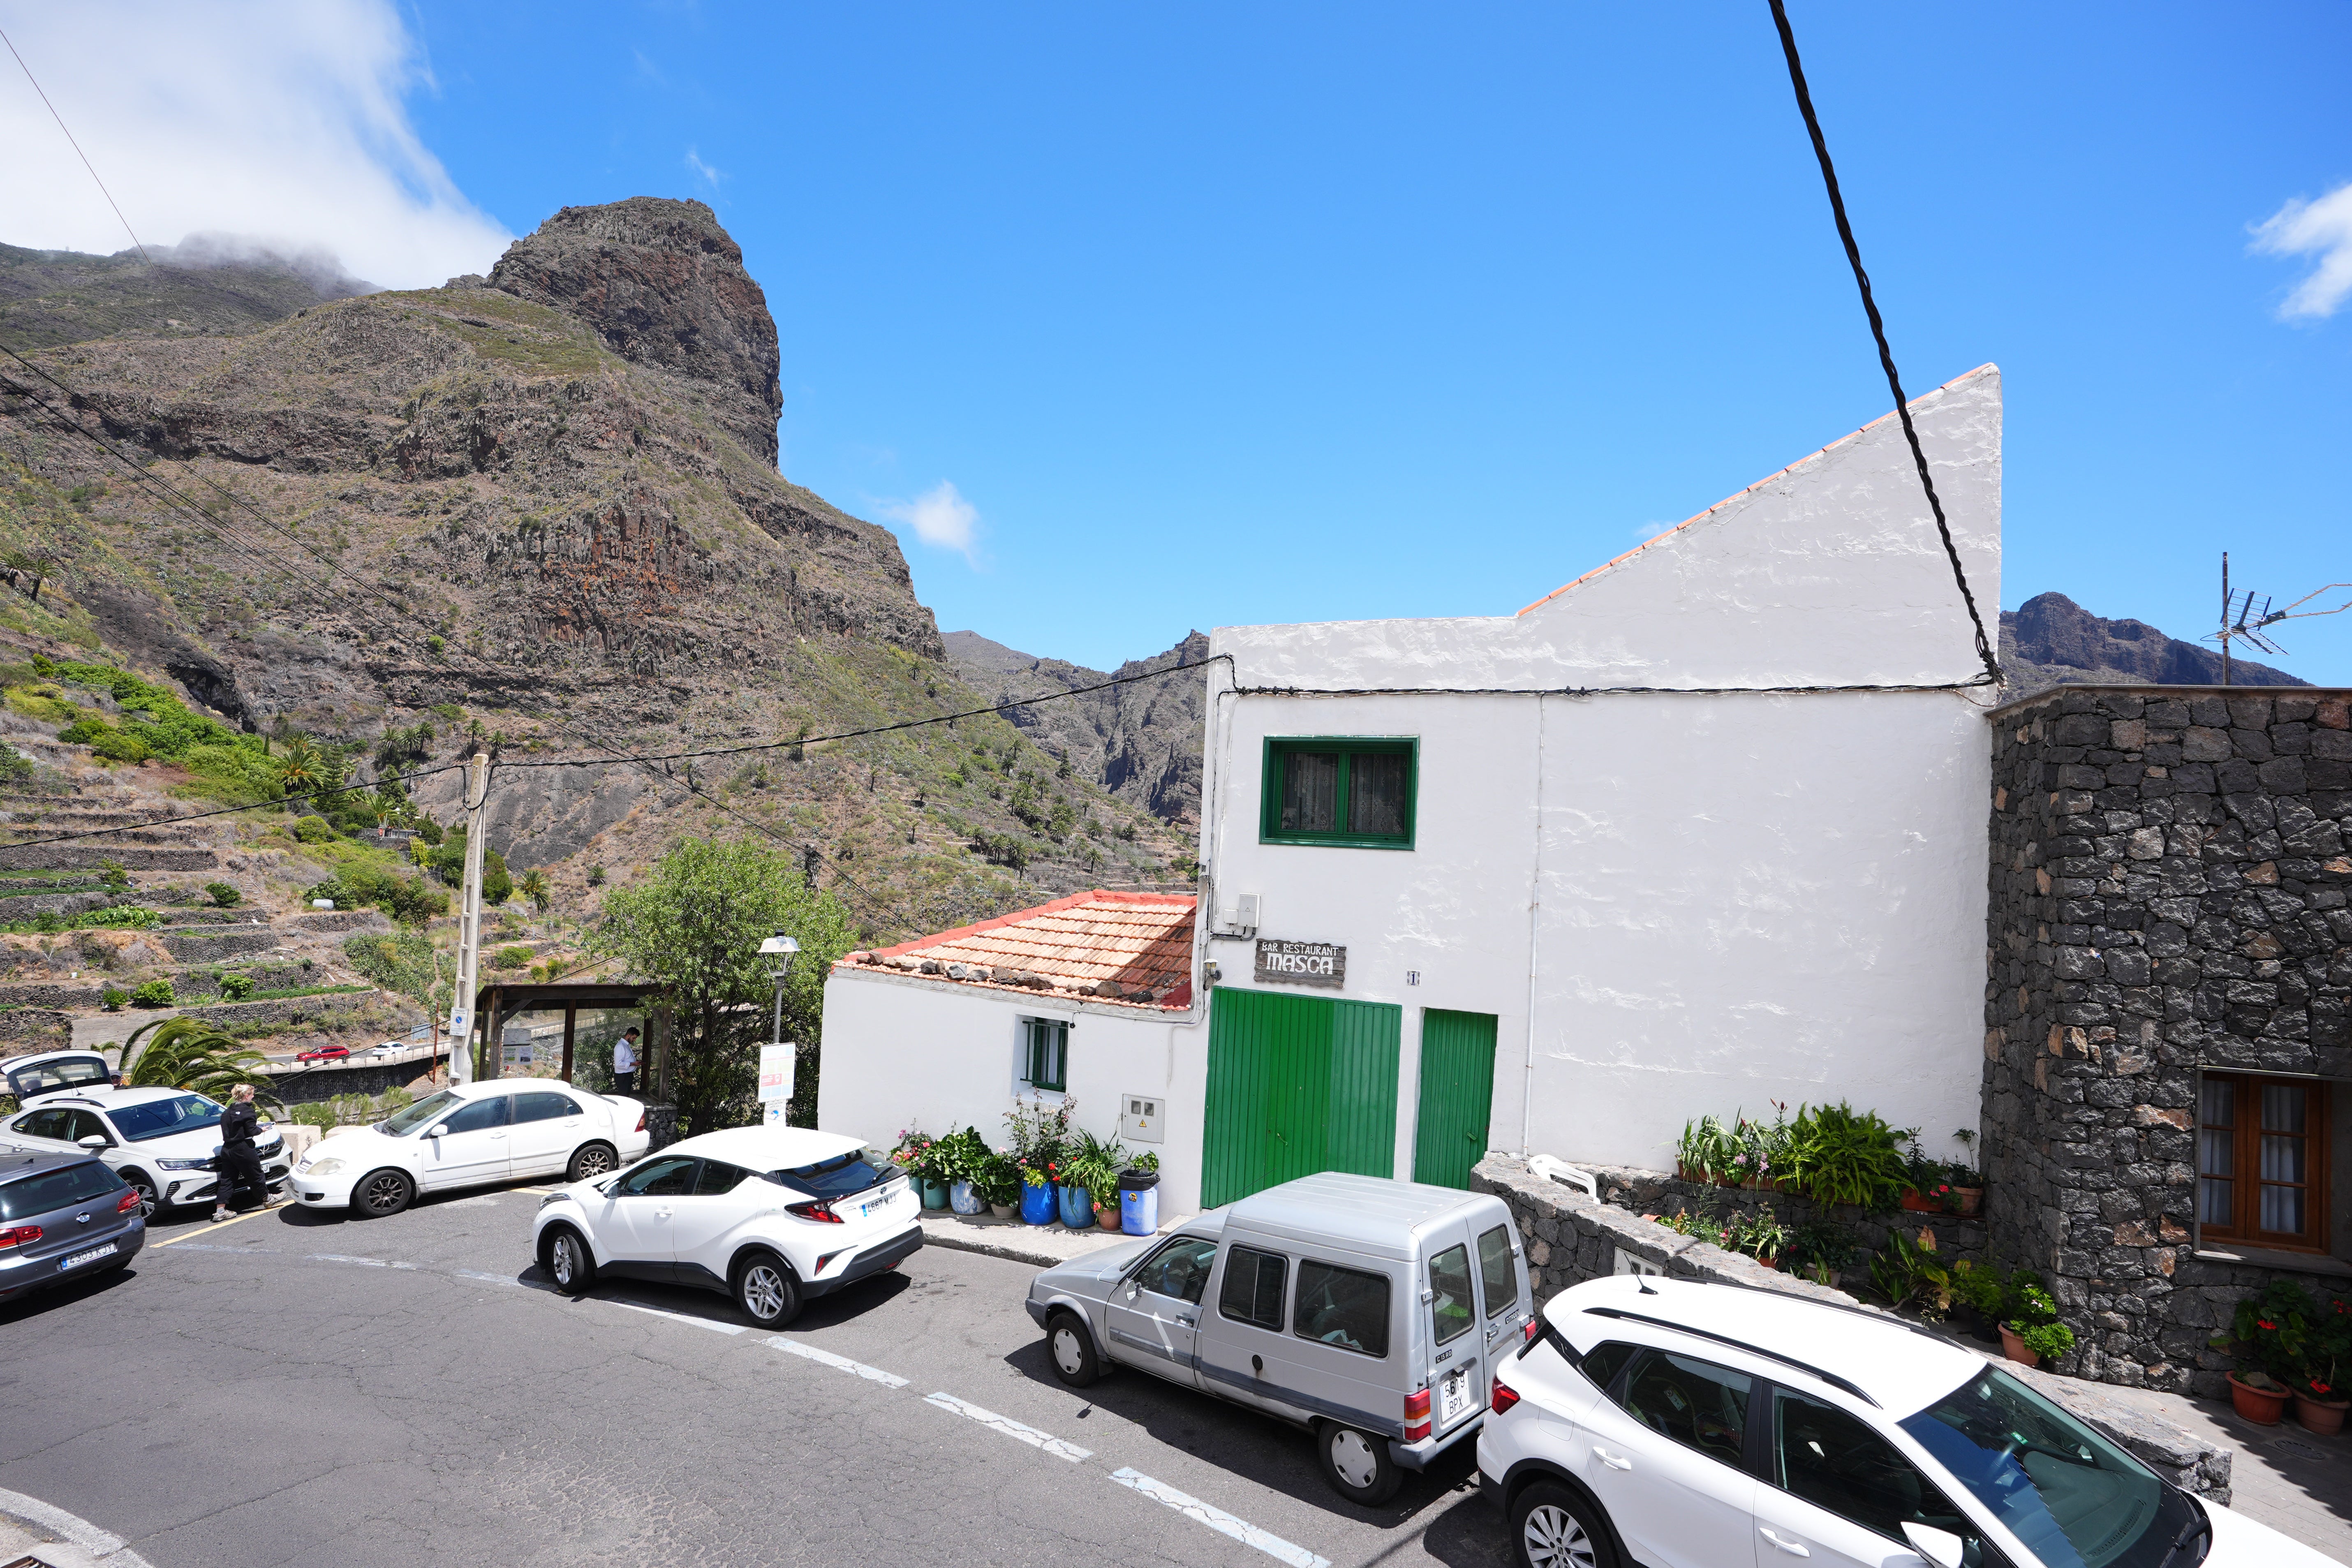 The Airbnb Casa Abuela Tina in Masca, Tenerife, where missing British teenager Jay Slater resided prior to his disappearance (James Manning/PA)